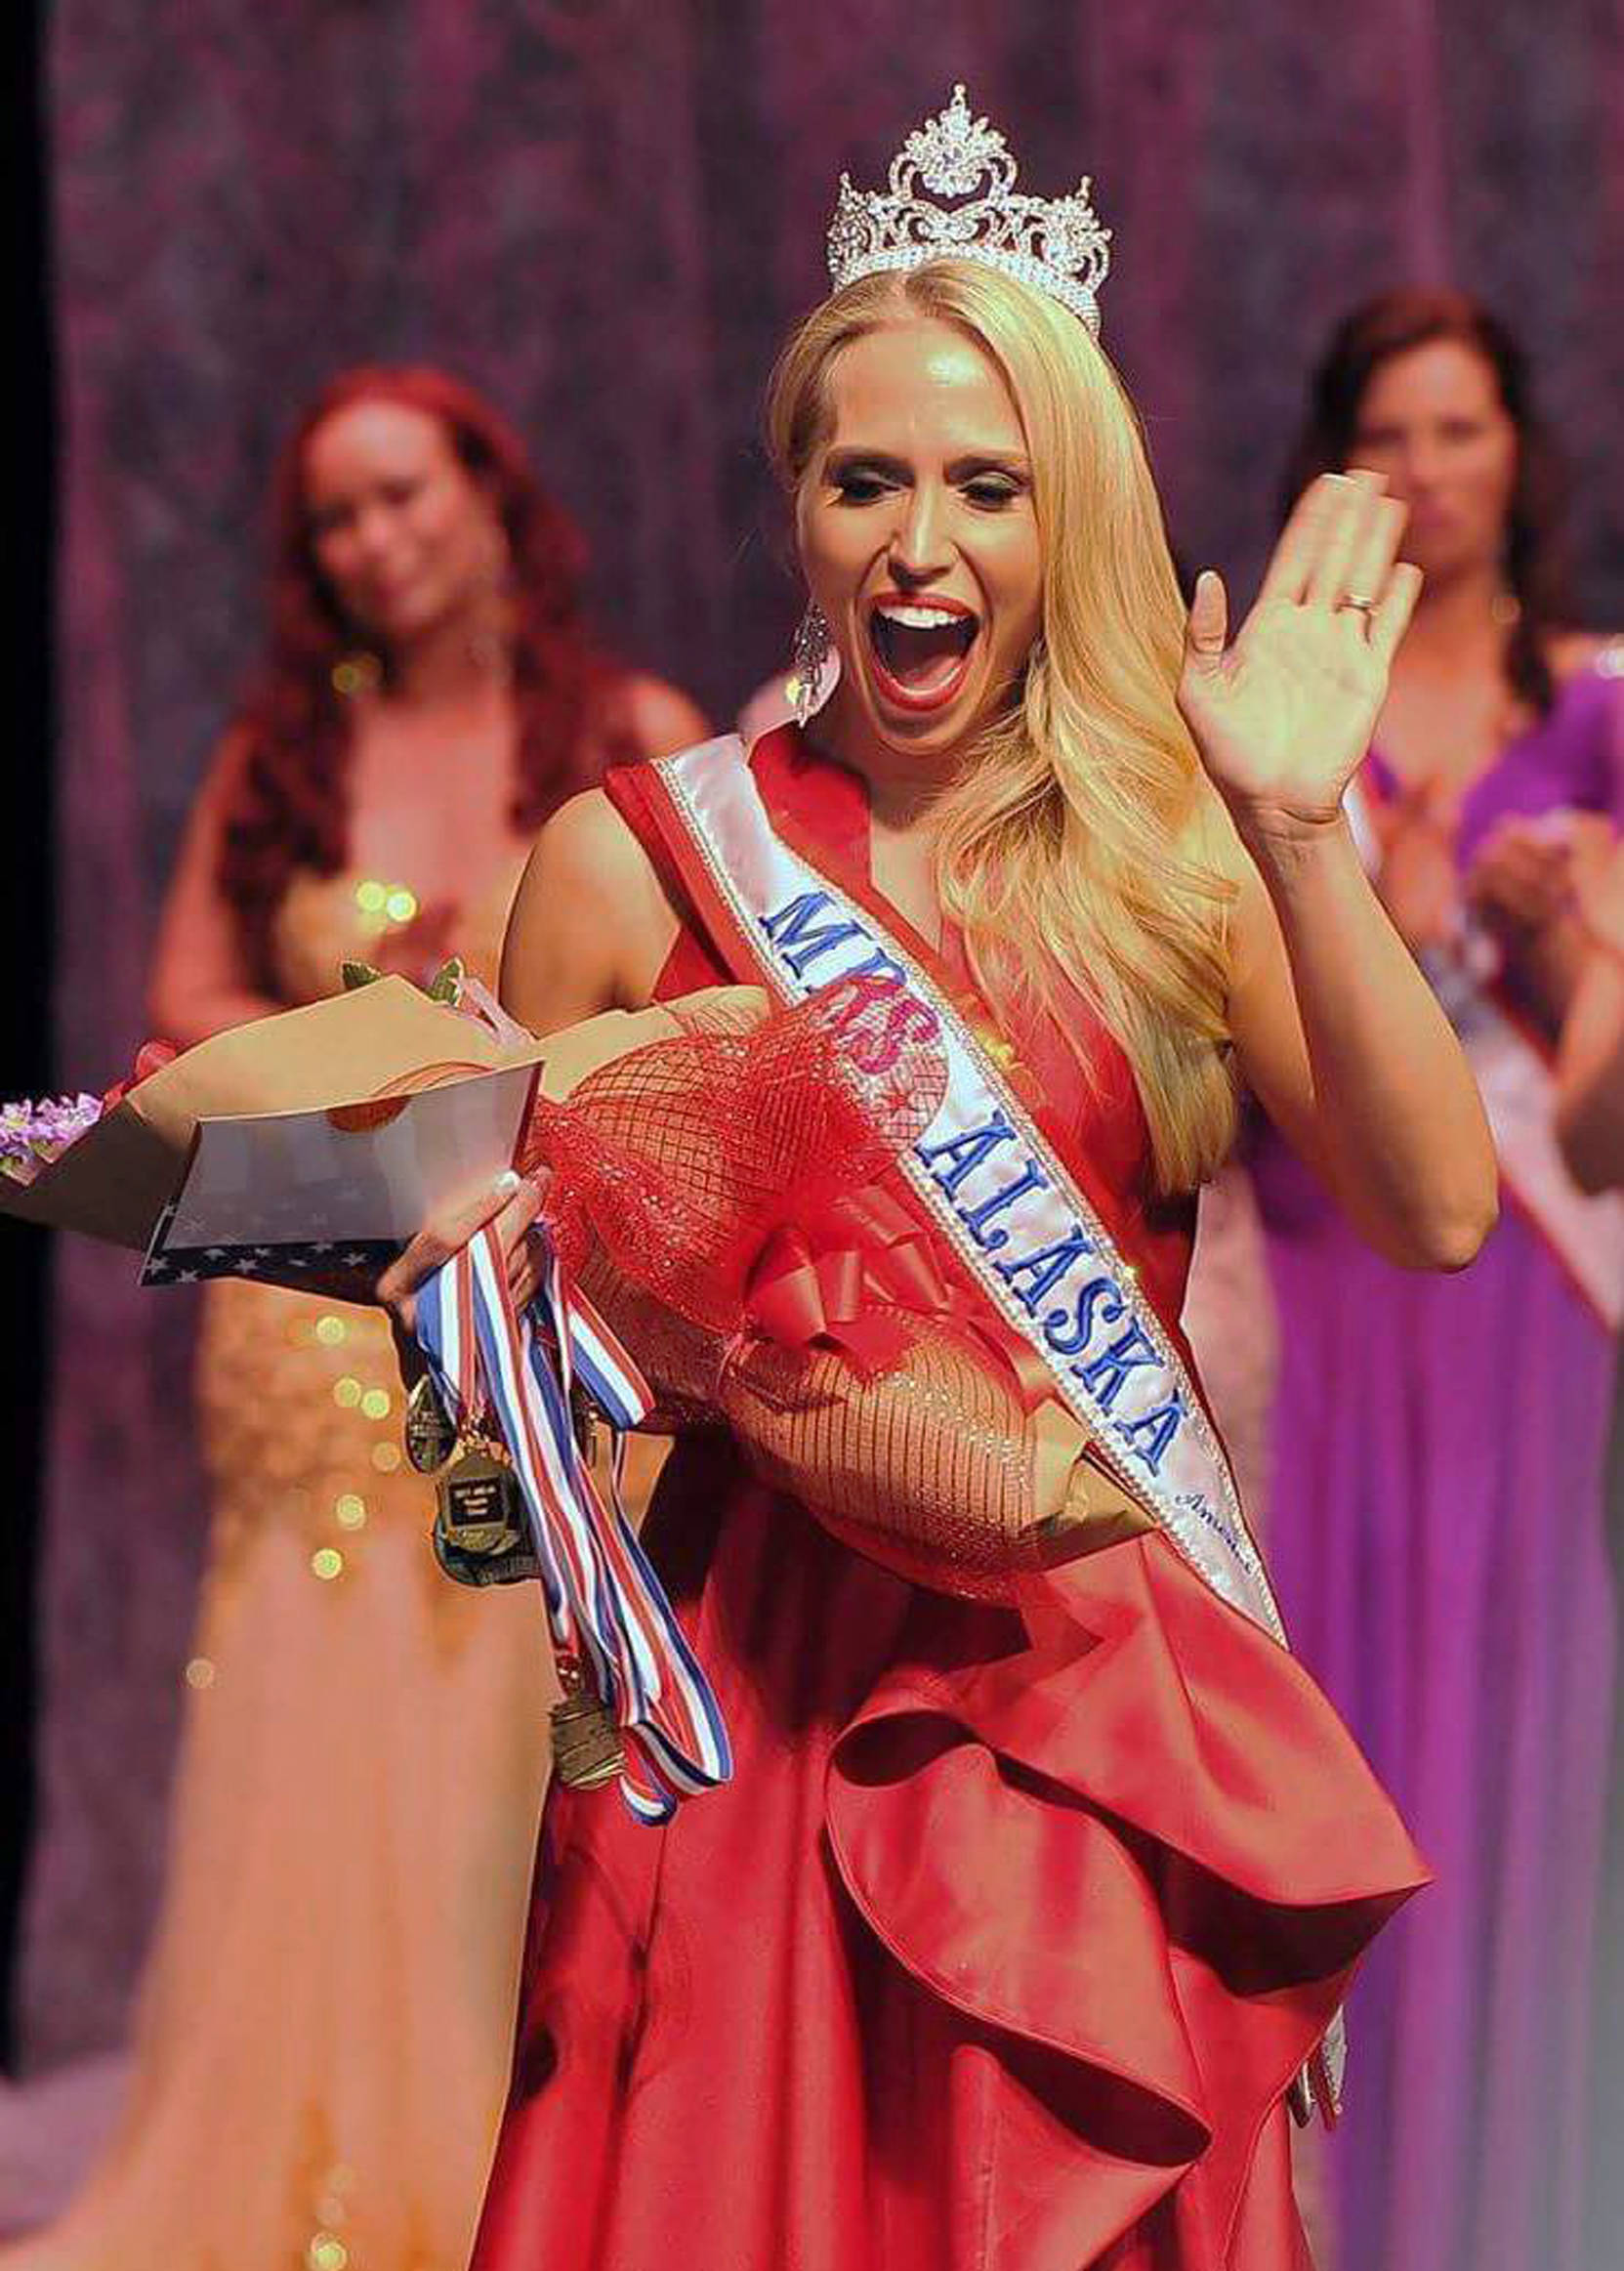 Redoubt Elementary second-grade teacher Kersten Gomez, 37, reacts to winning the Mrs. Alaska America competition May 13 in Anchorage, Alaska. Gomez is the second woman in two years from the central Kenai Peninsula to claim first place in the event. (Photo courtesy Rita Corwin)